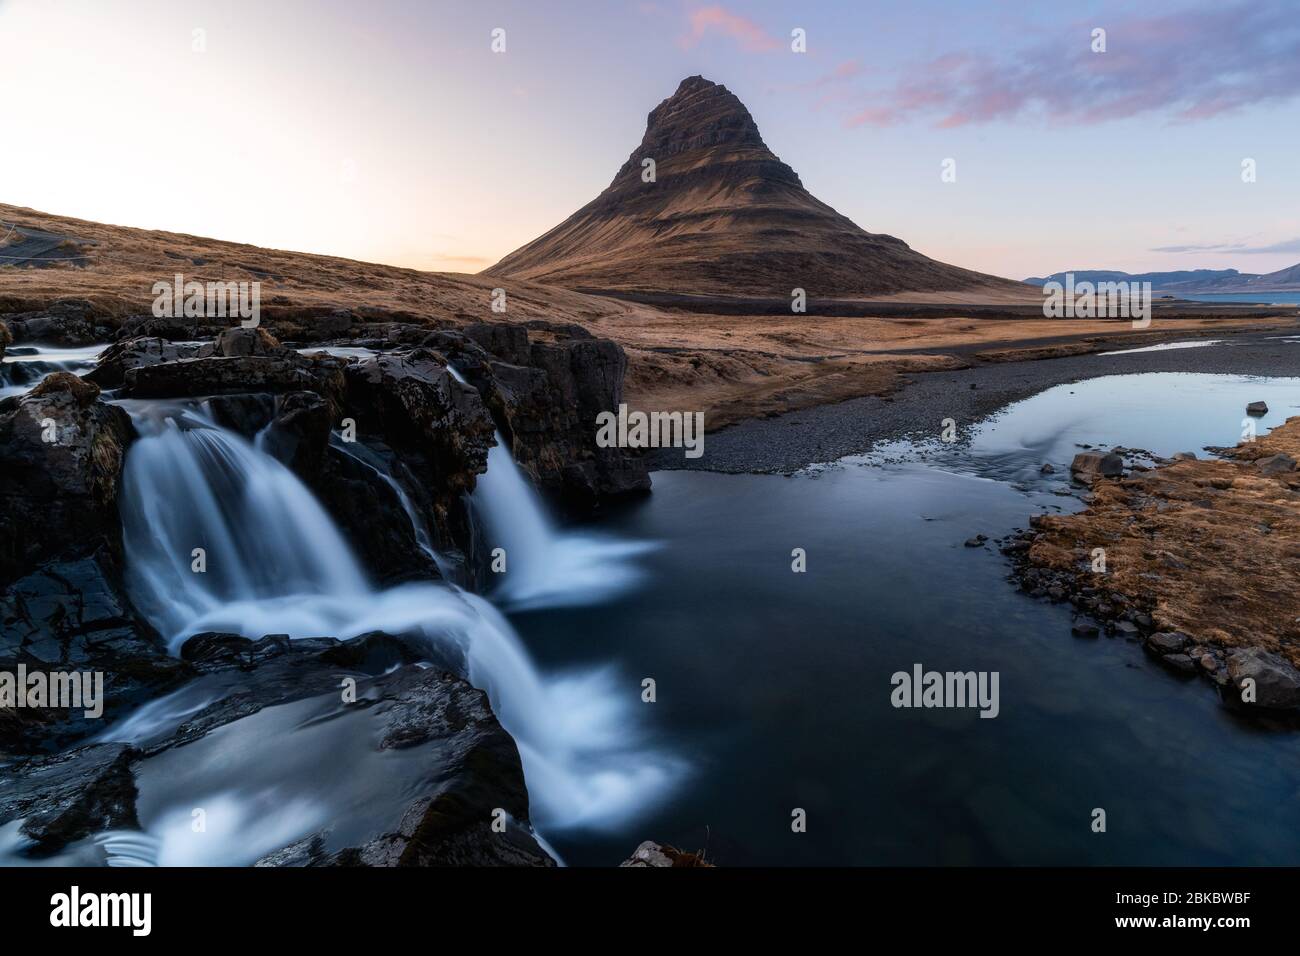 Kirkjufell is one of the most scenic and photographed mountains in Iceland all year around. Beautiful Icelandic landscape of Scandinavia Stock Photo